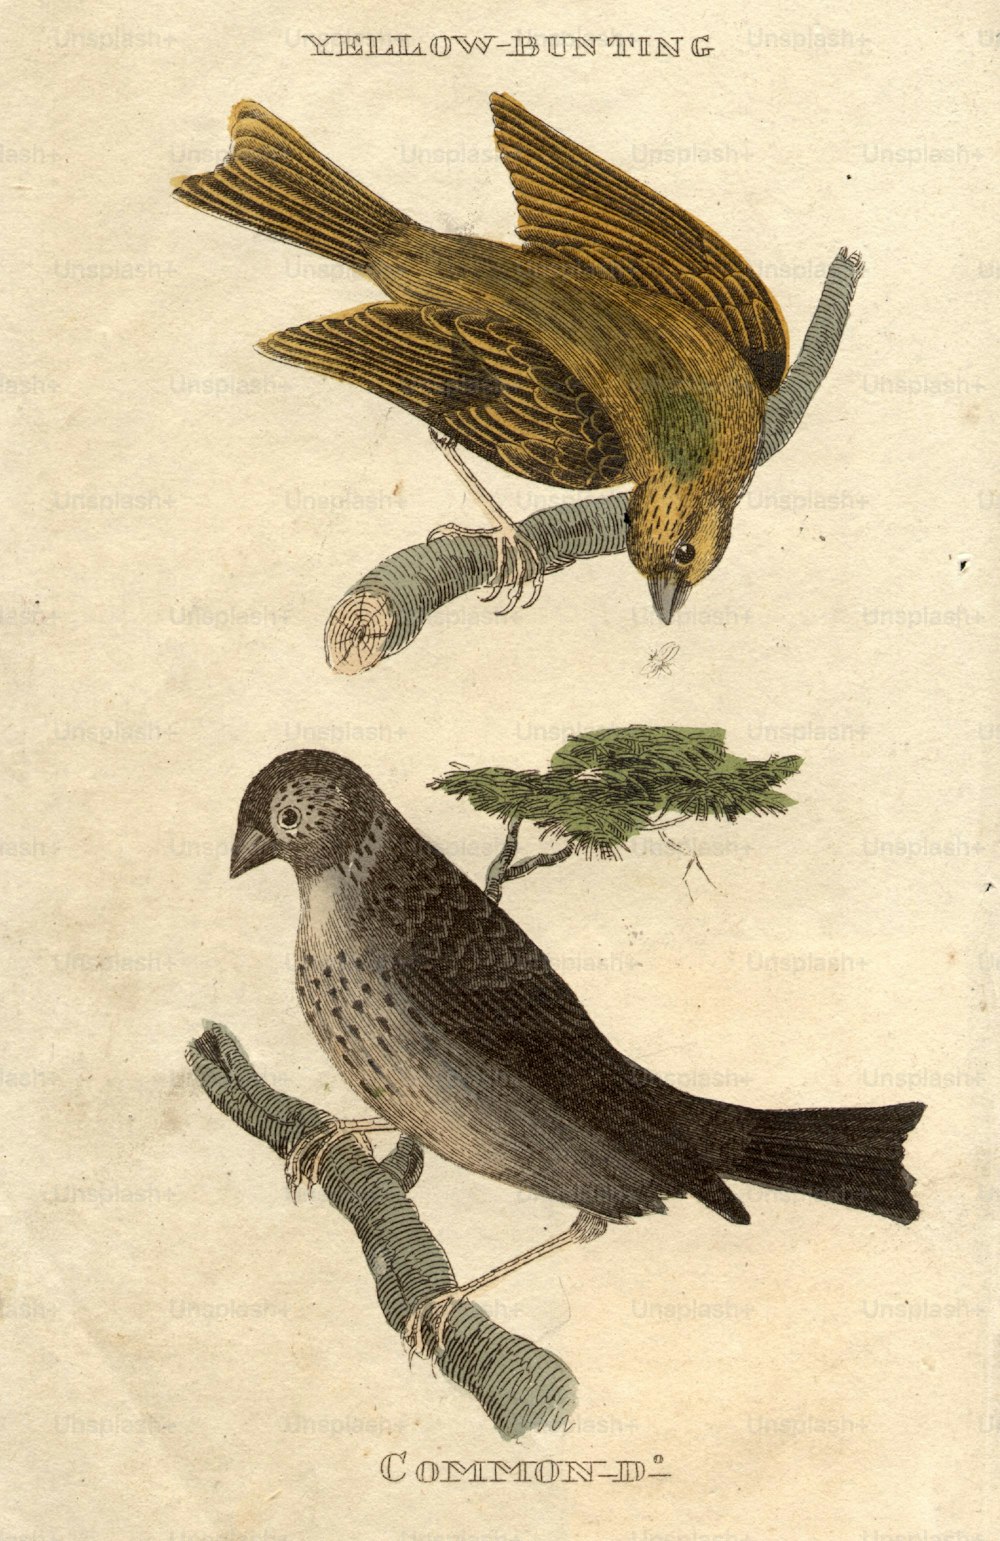 circa 1800:  A Yellow Bunting, top, and Common Bunting, bottom.  (Photo by Hulton Archive/Getty Images)